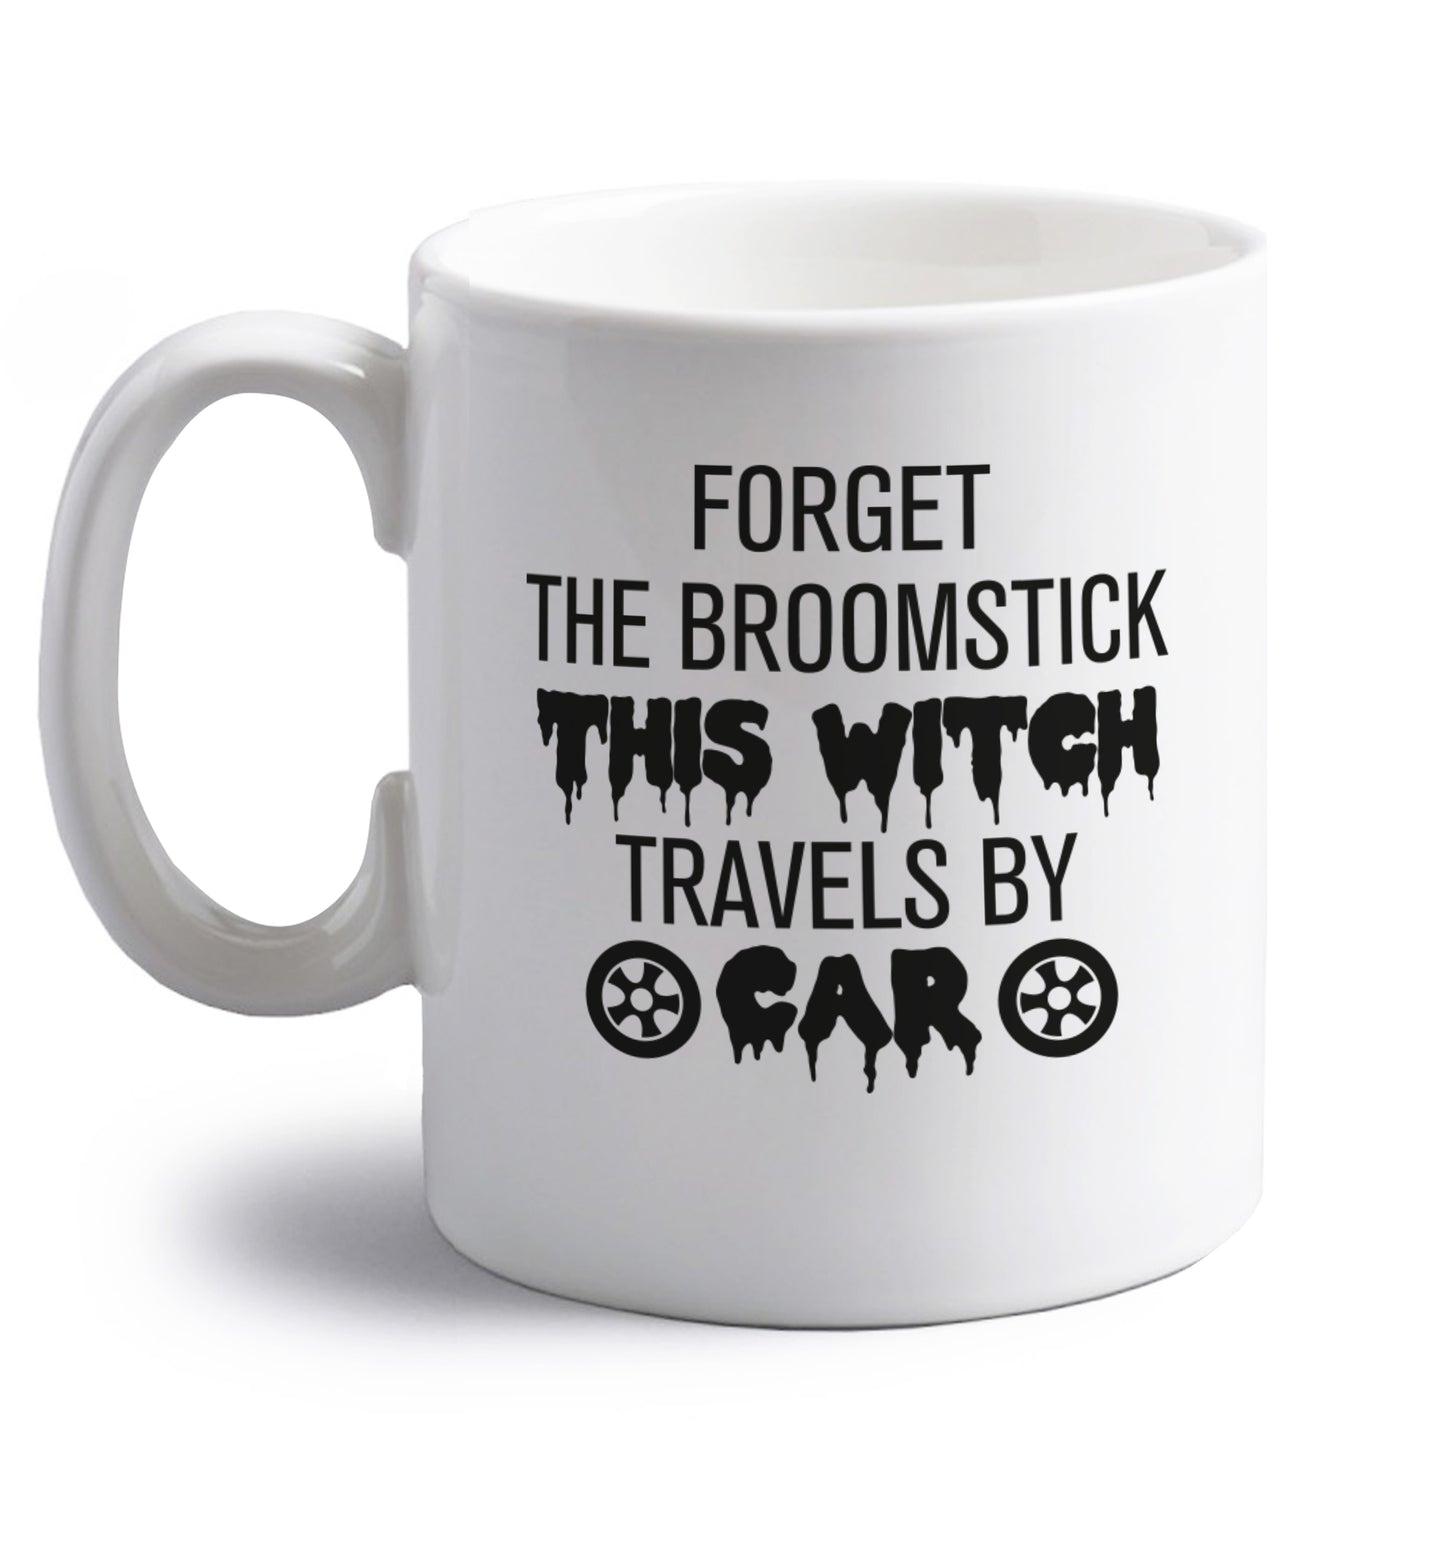 Forget the broomstick this witch travels by car right handed white ceramic mug 